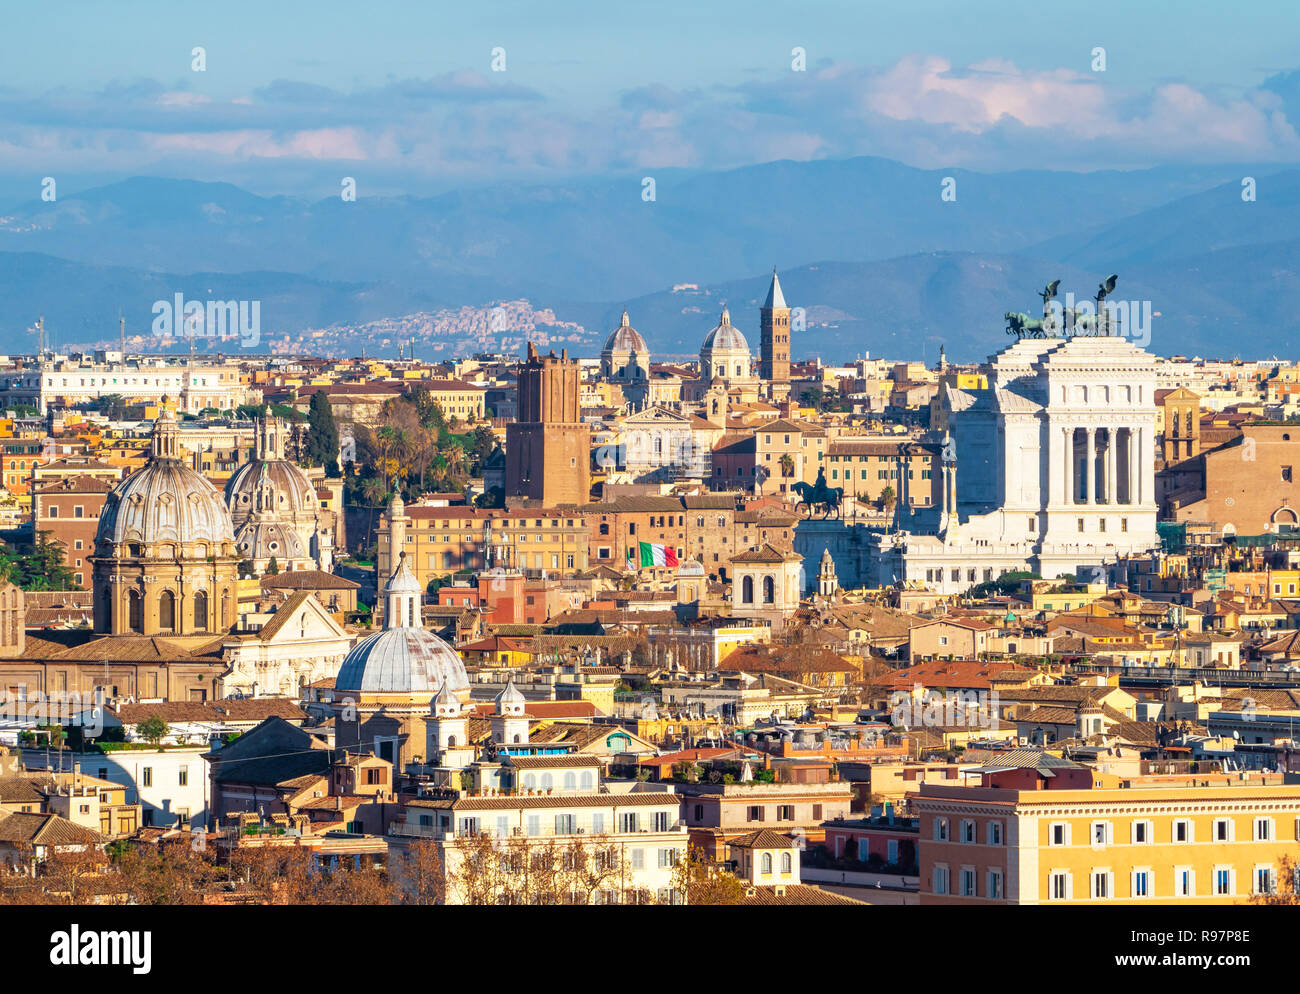 Rome (Italy) - The view of the city from Janiculum hill and terrace, with Vittoriano, Trinità dei Monti church and Quirinale palace. Stock Photo